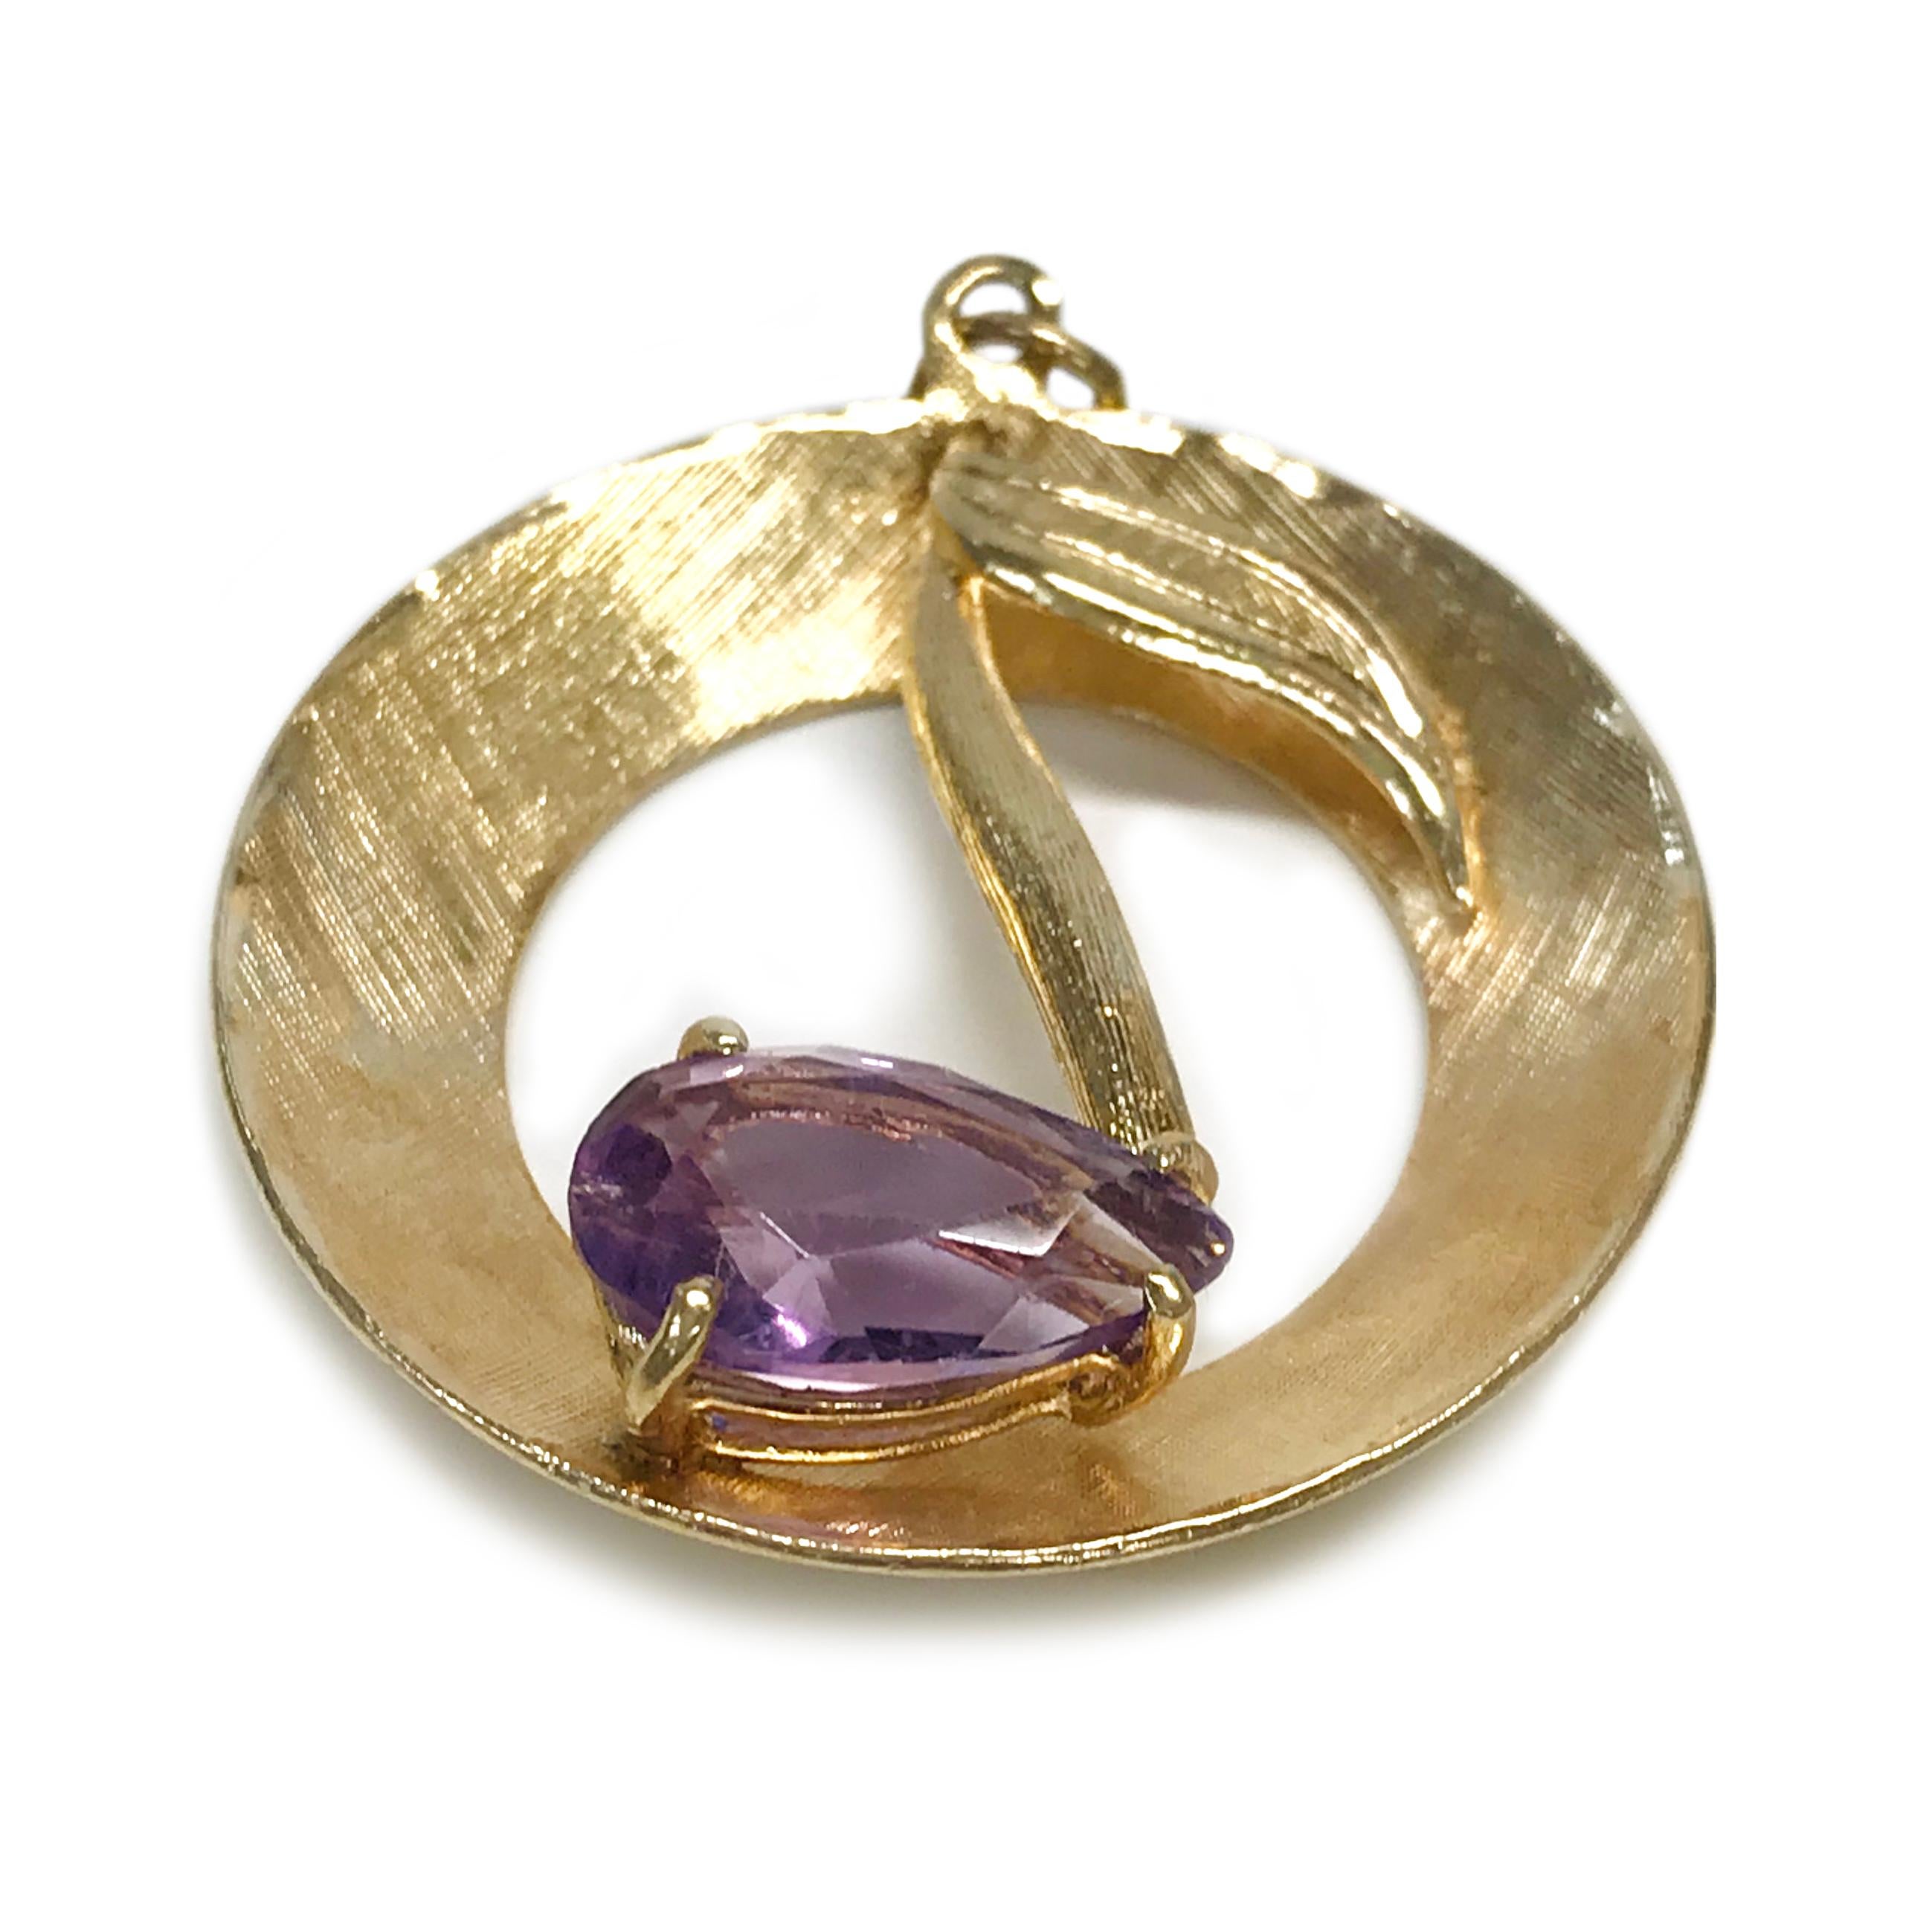 14 Karat Yellow Gold Rembrandt Musical Note Amethyst Pendant. The pendant measures 31.5mm in diameter. The front of the open circle pendant has a satin texture on the front with a musical note in the center. The bottom of the note has a pear-shaped